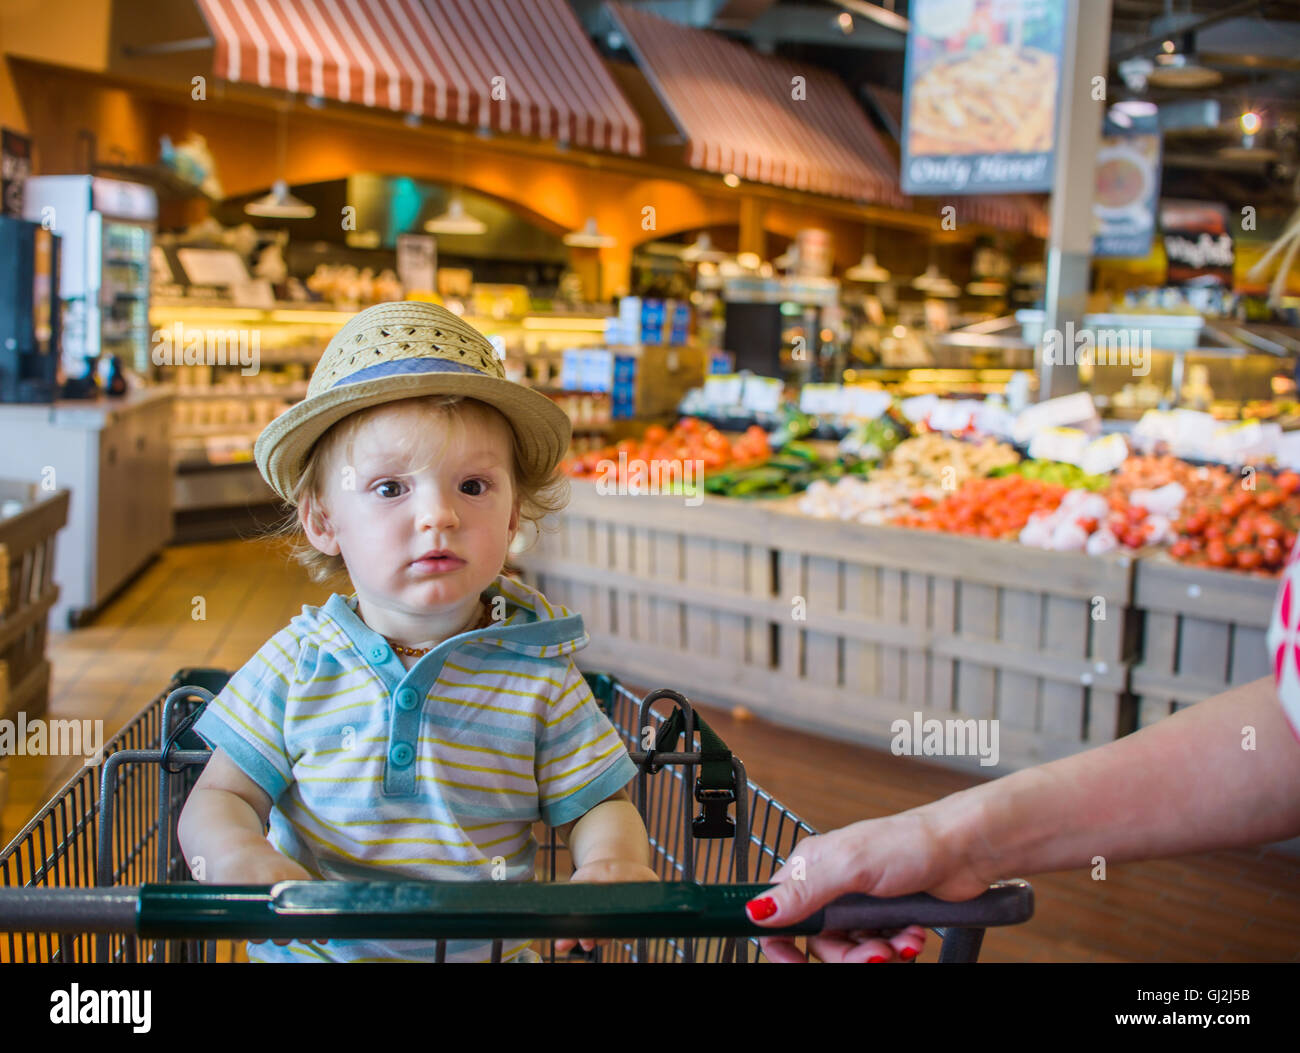 Baby Boy wearing straw hat sitting in shopping trolley Banque D'Images